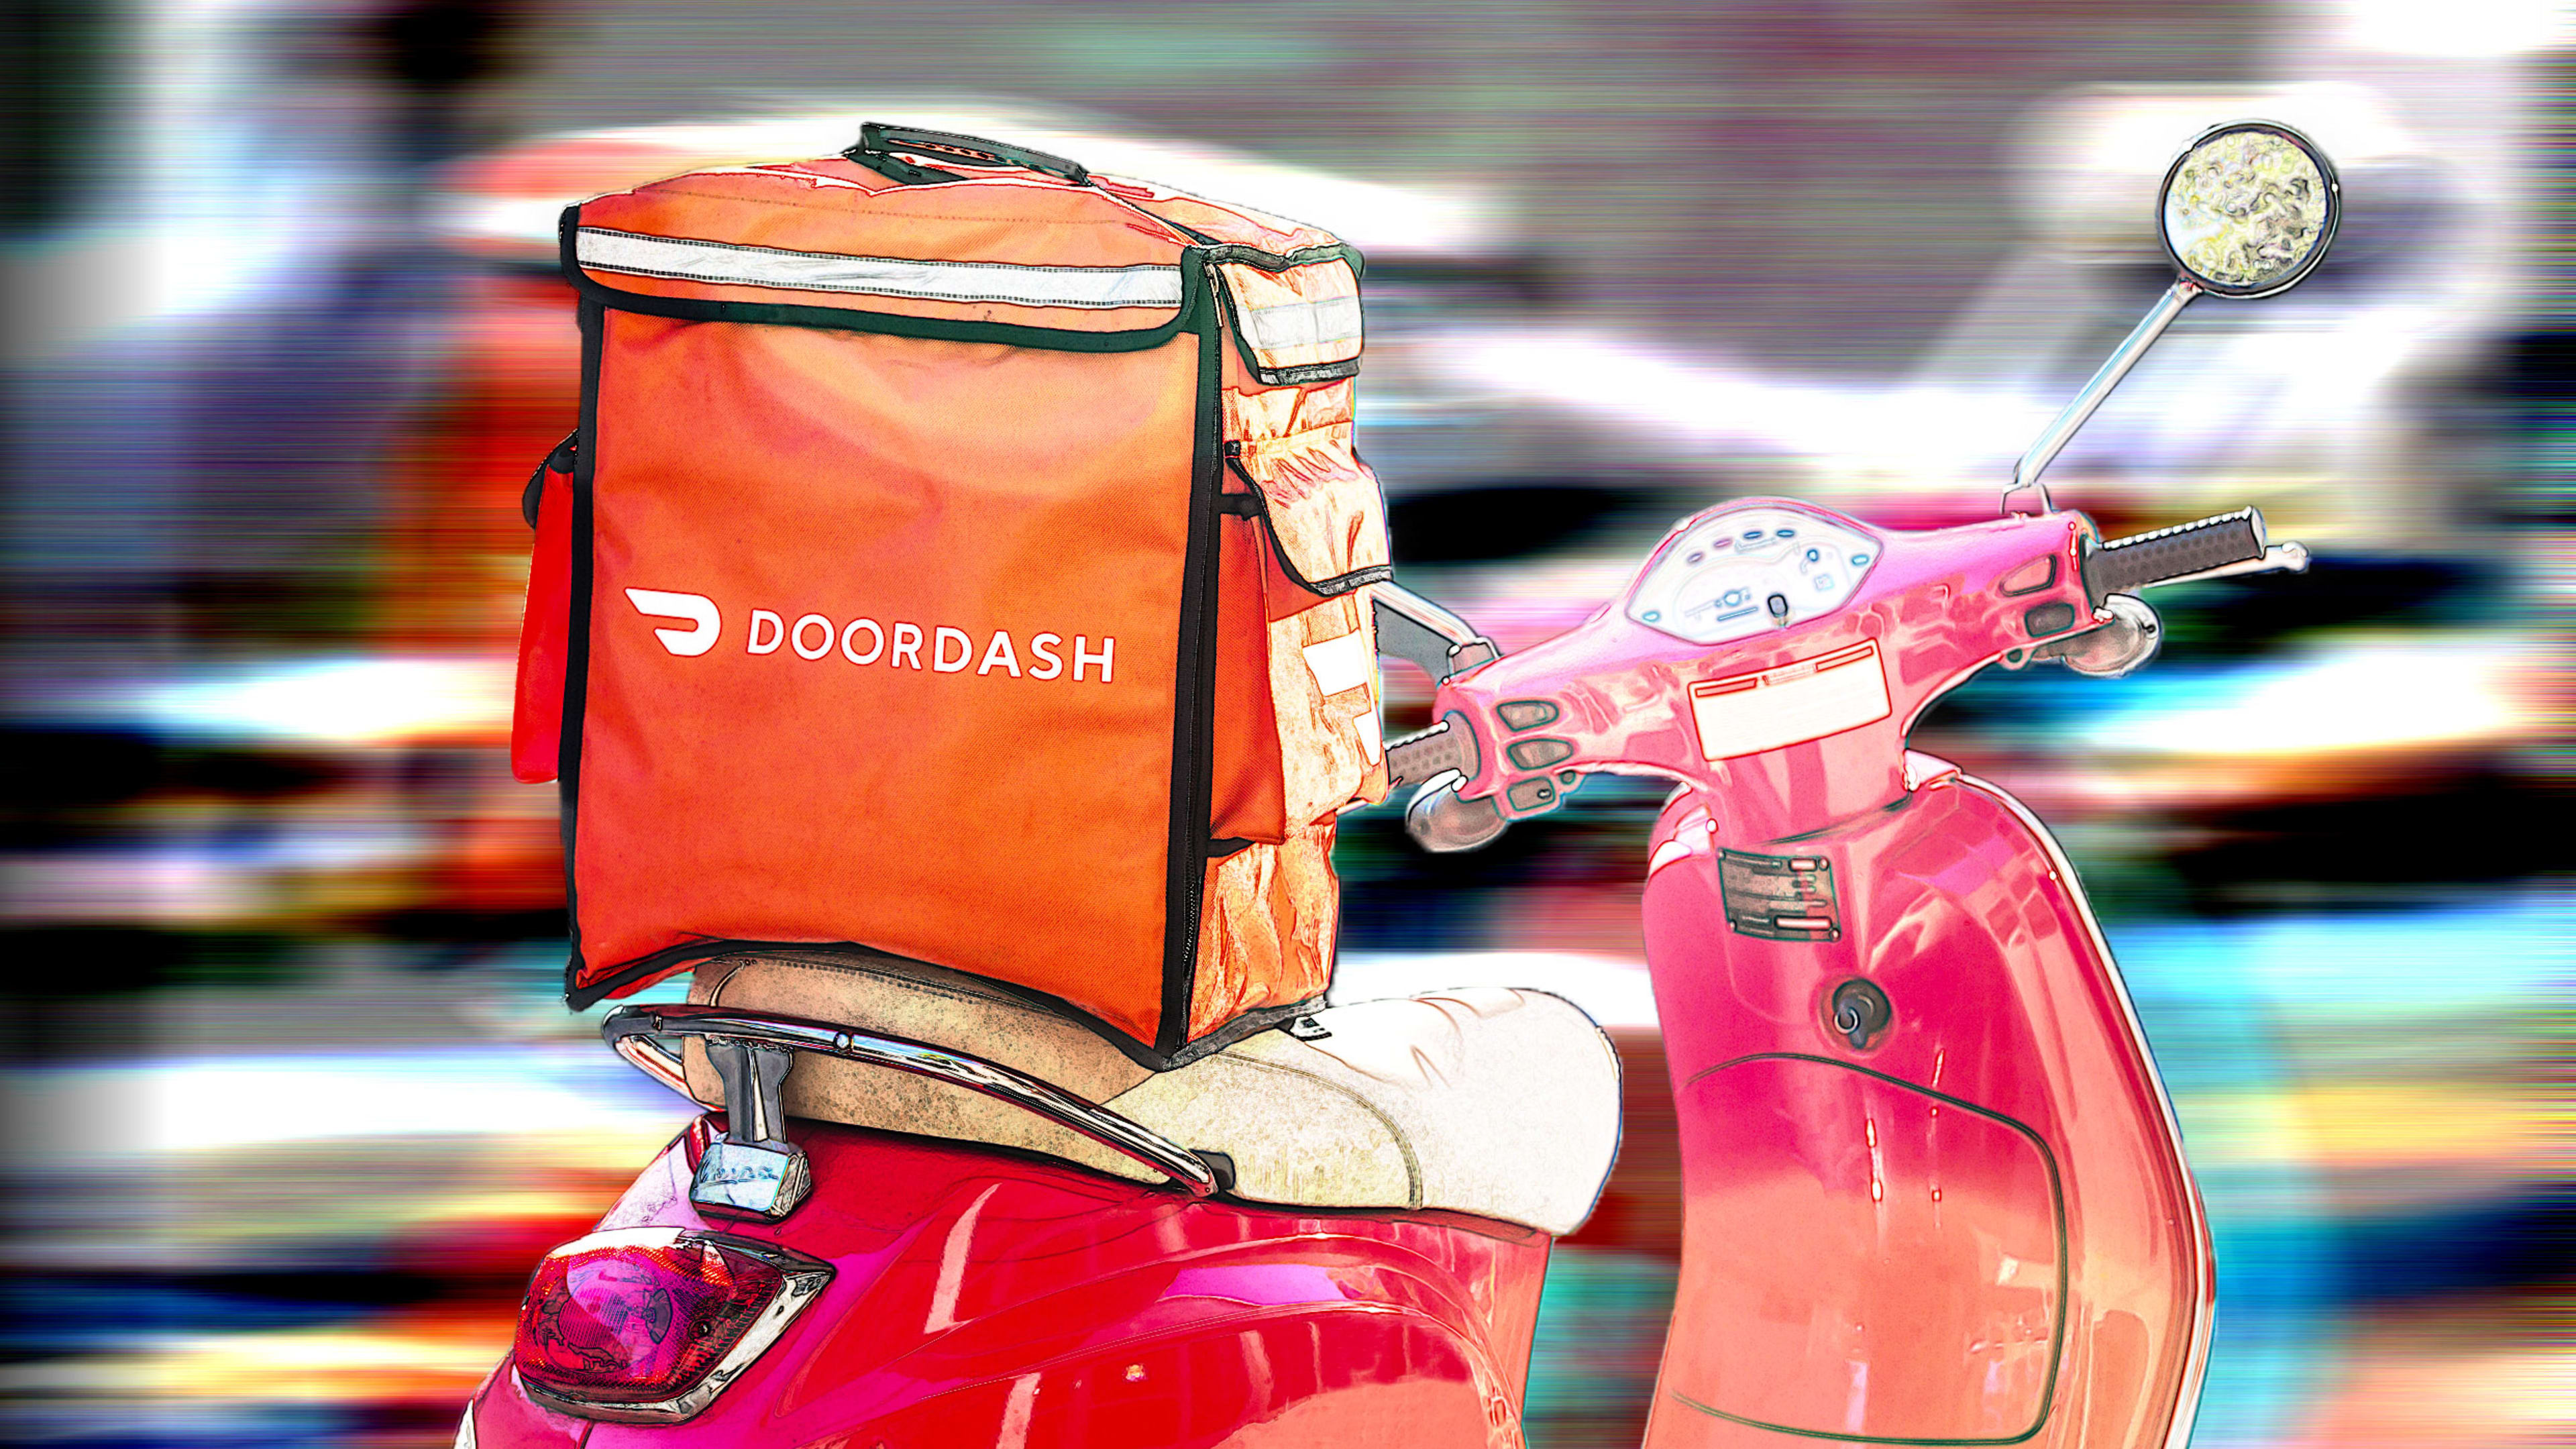 DoorDash Q1 earnings: Delivery platform grows revenue 40% compared to a year ago